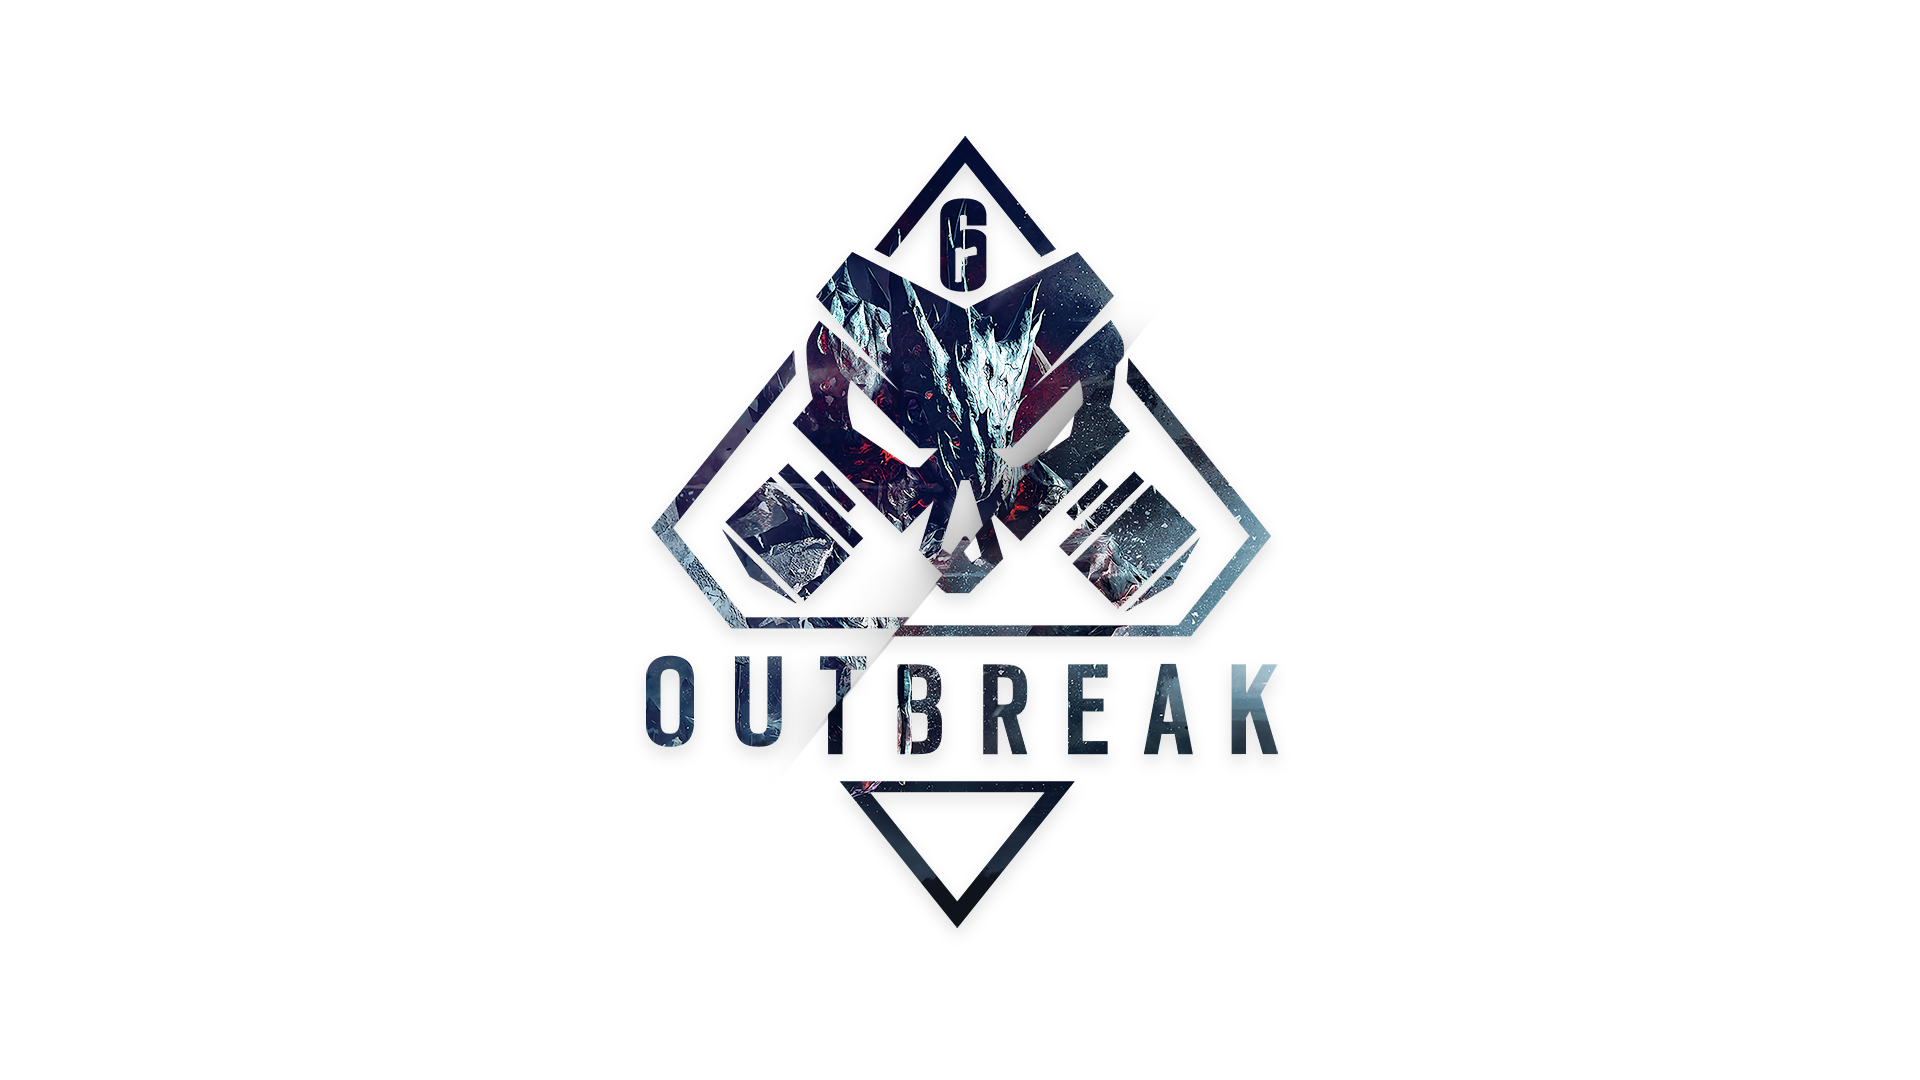 I Made Another Outbreak Wallpaper Rainbow6